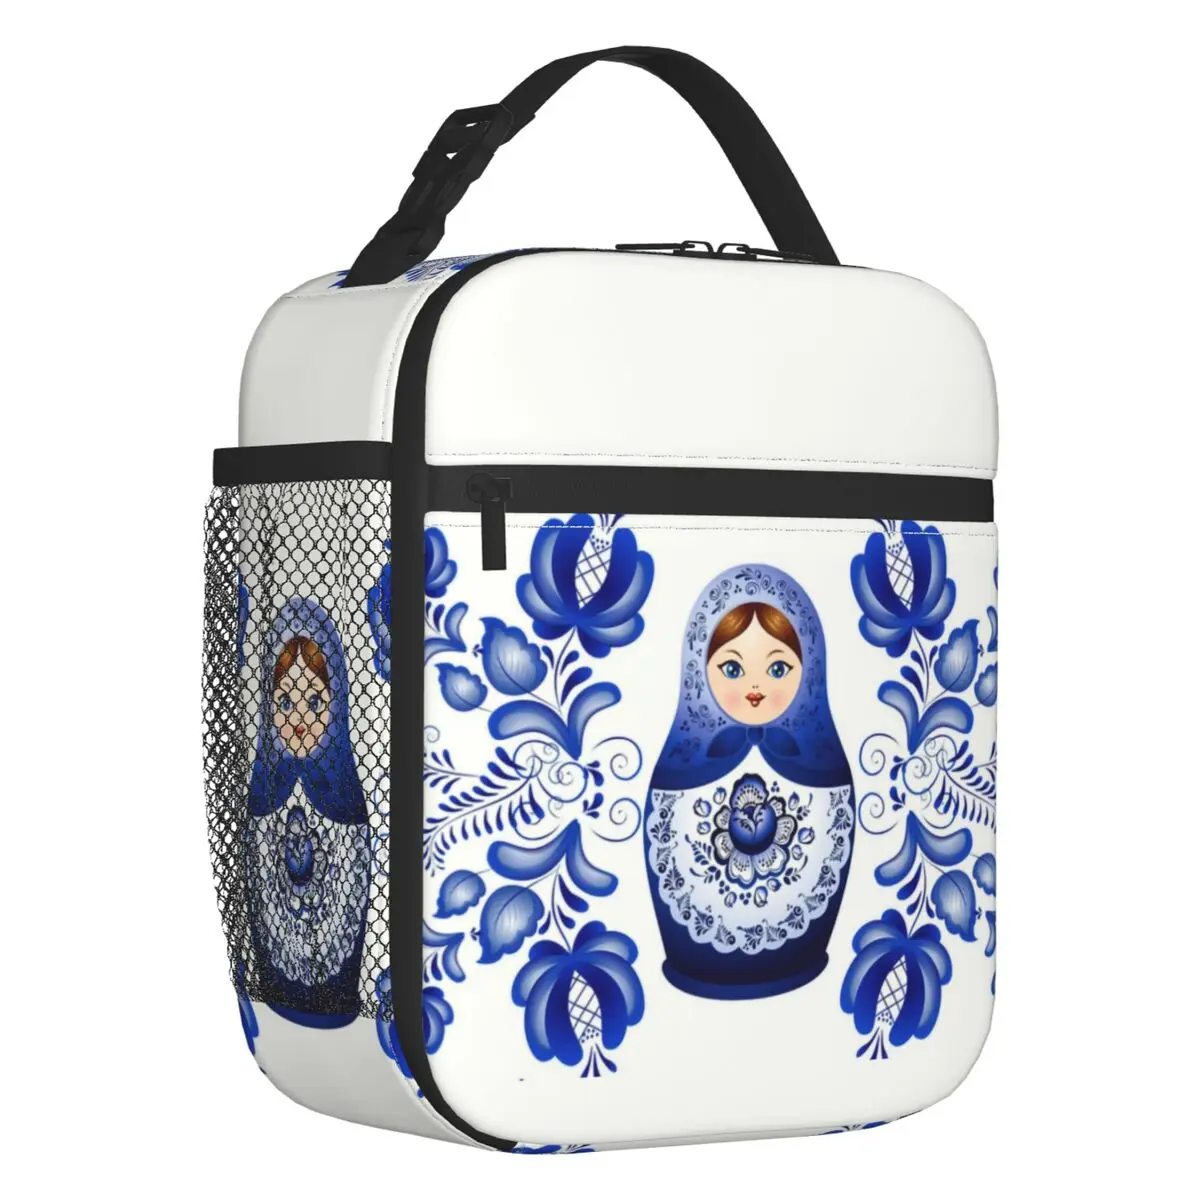 

Matryoshka Doll Russia Insulated Lunch Bag for School Office Russian Folk Art Resuable Cooler Thermal Bento Box Women Children